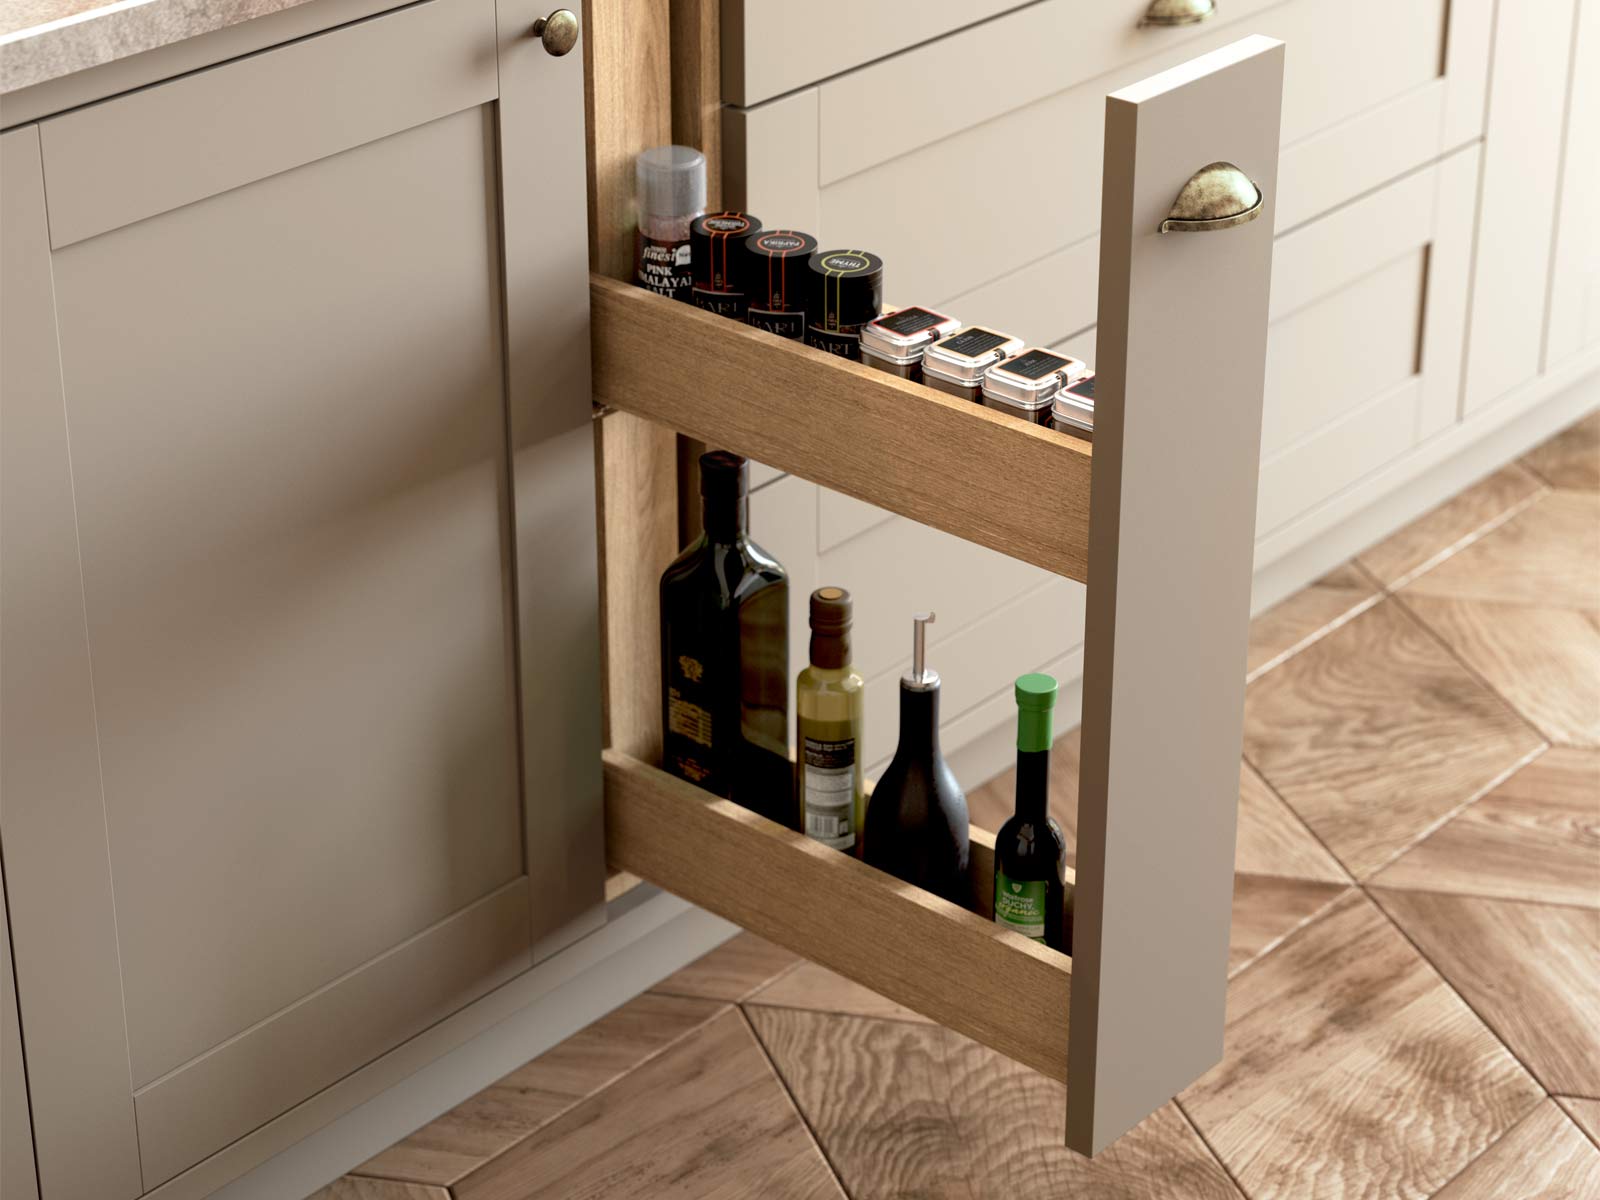 The larder – a kitchen unit pull-out storage system full of oils and spices